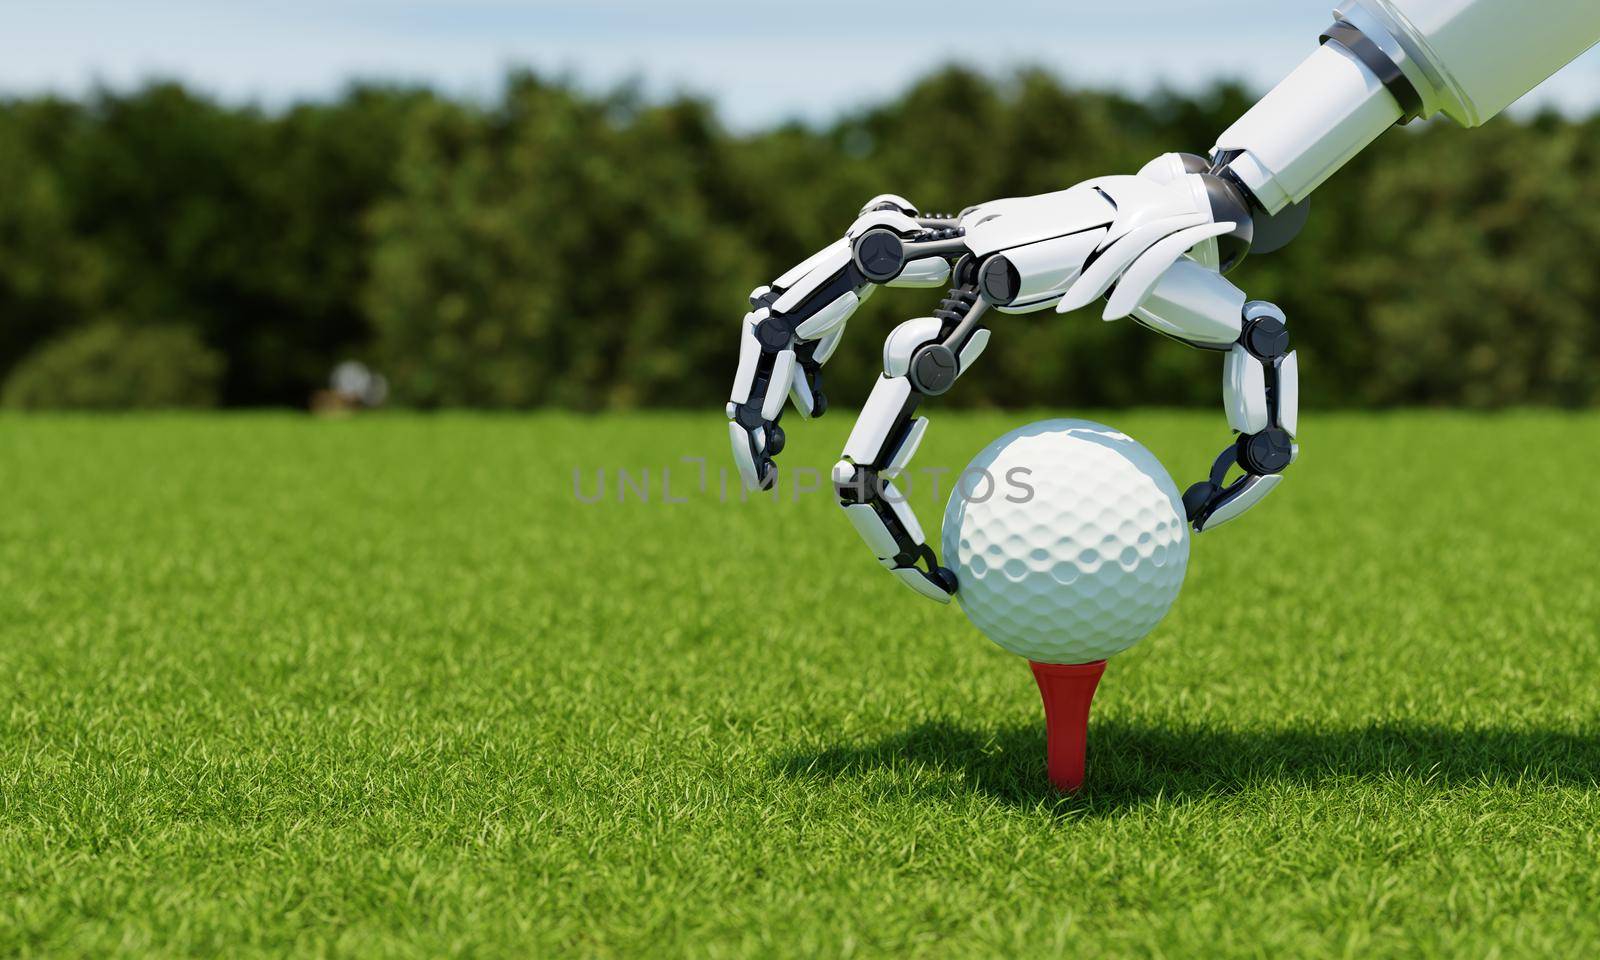 Robot arm putting golf ball on tee as caddy or player with fairway green background. Sport athletic and technology concept. 3D illustration rendering by MiniStocker